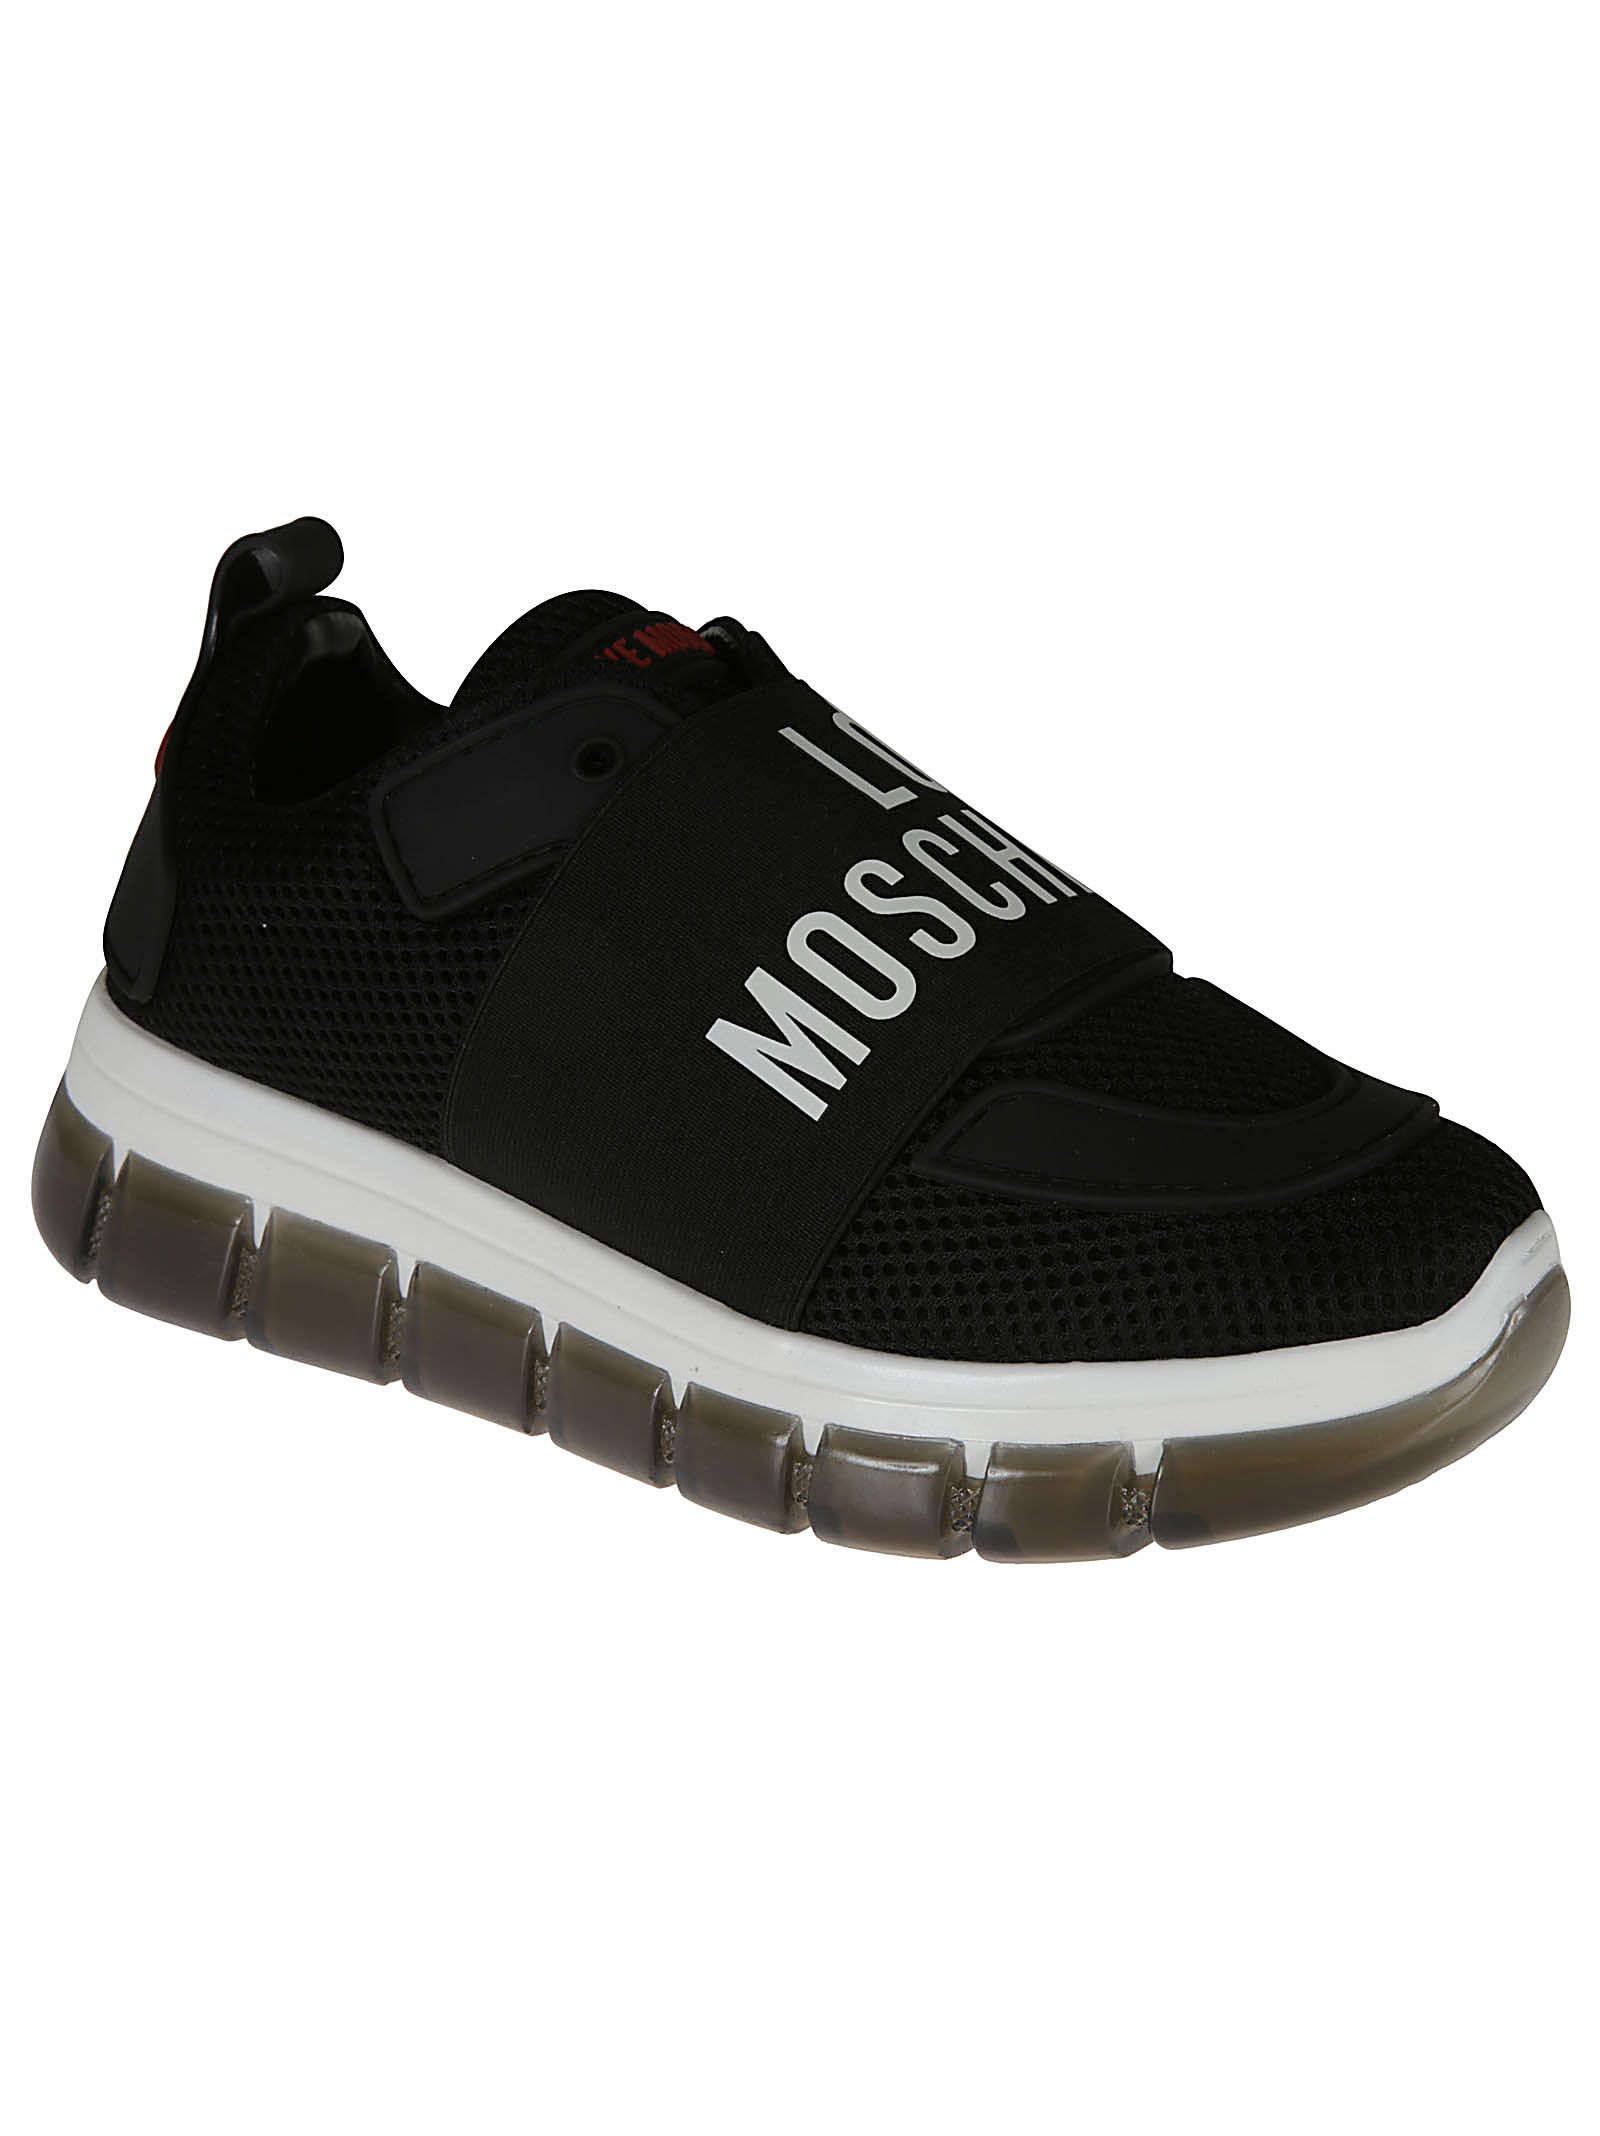 Love Moschino Sneakers | italist, ALWAYS LIKE A SALE